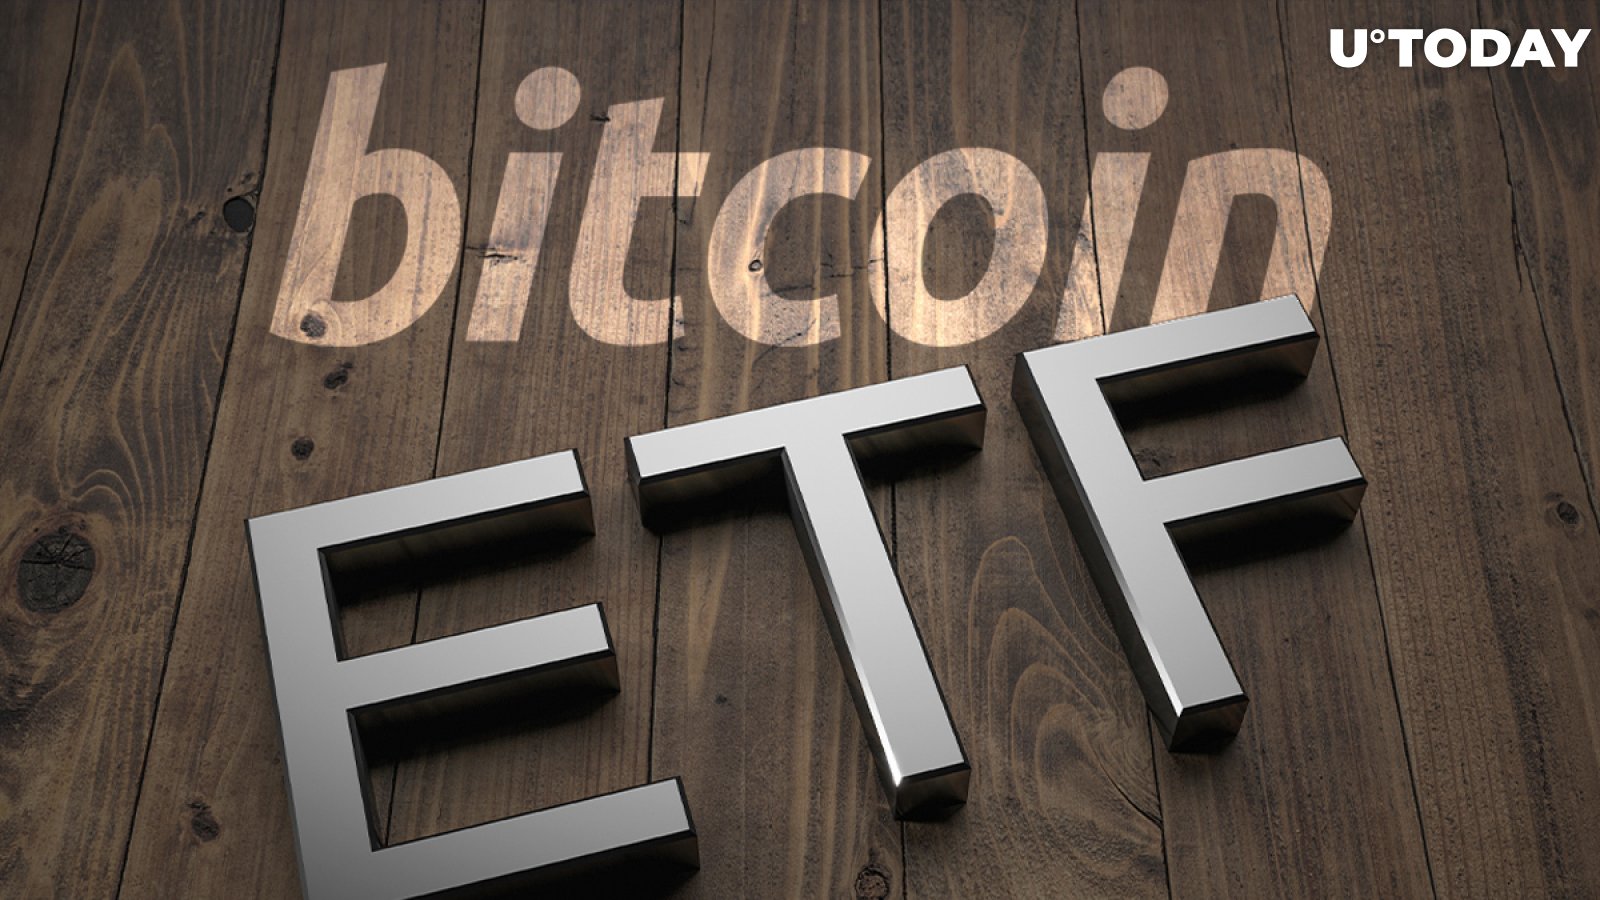 Bitcoin ETF Approval in US Could Hurt BTC, JP Morgan Says, Here’s Why 